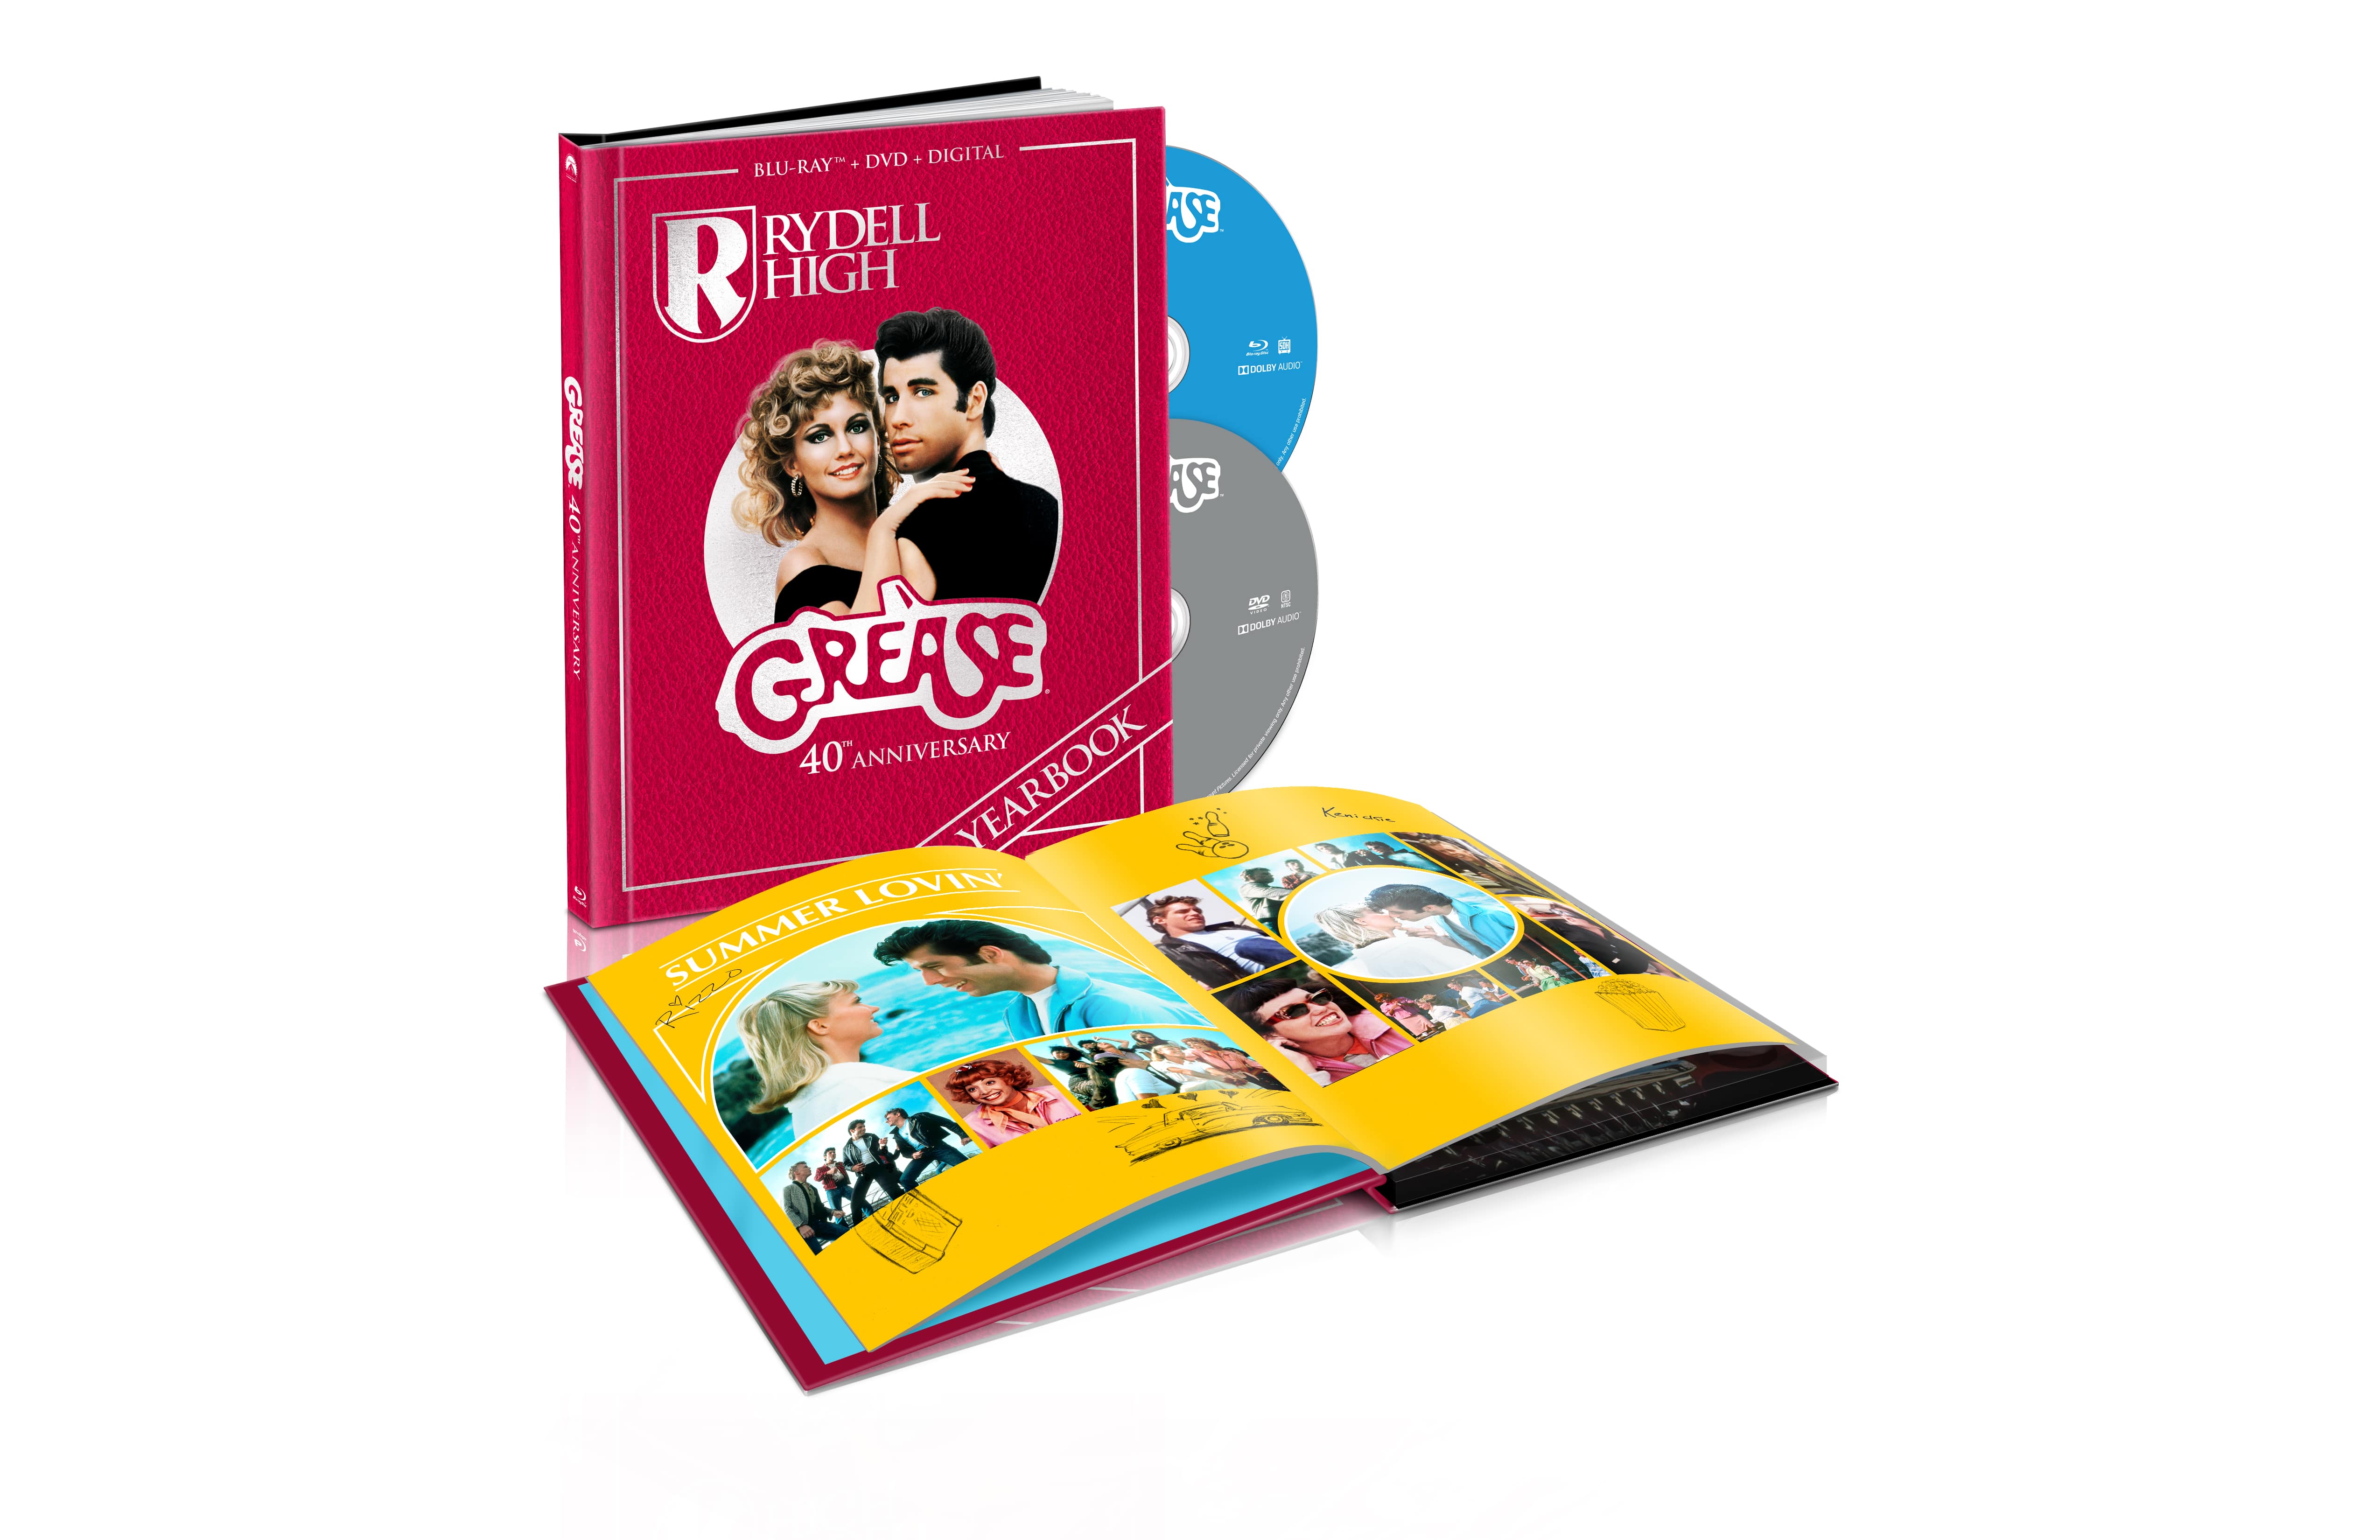 Grease: 40th Anniversary Edition Blu-Ray Combo Pack (Paramount Home Entertainment)